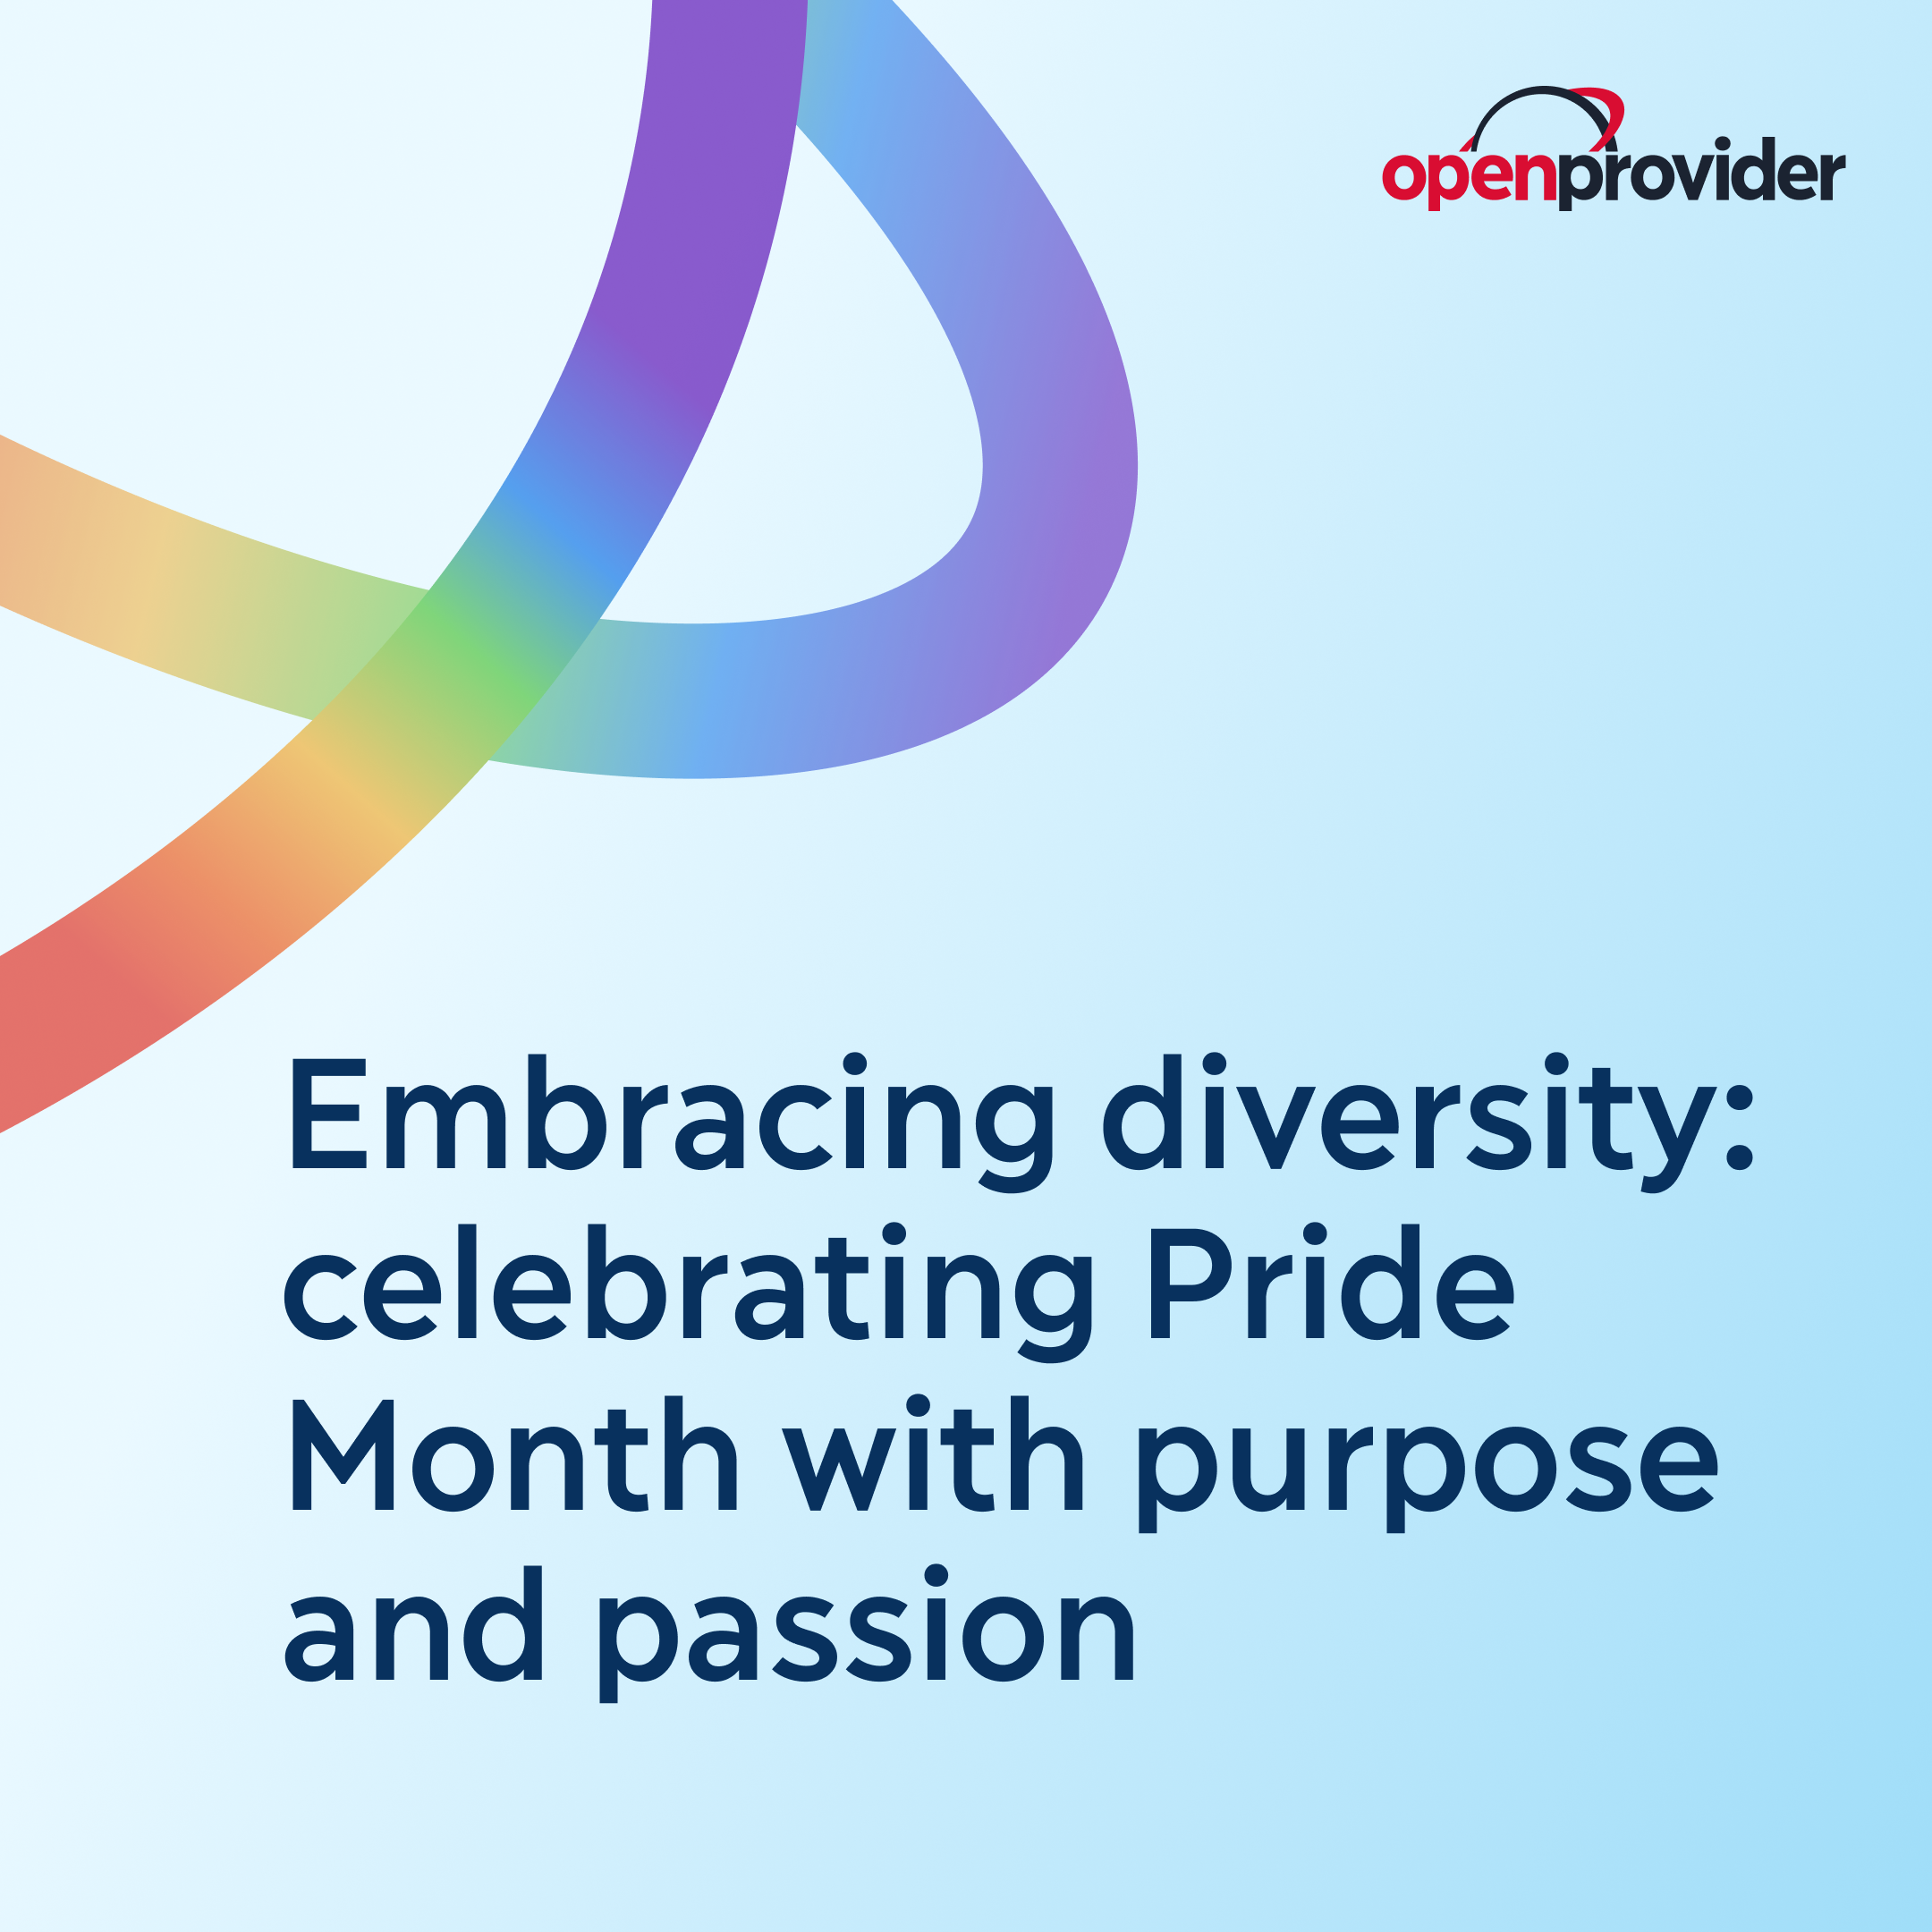 embracing diversity: celebrating pride month with purpose and passion